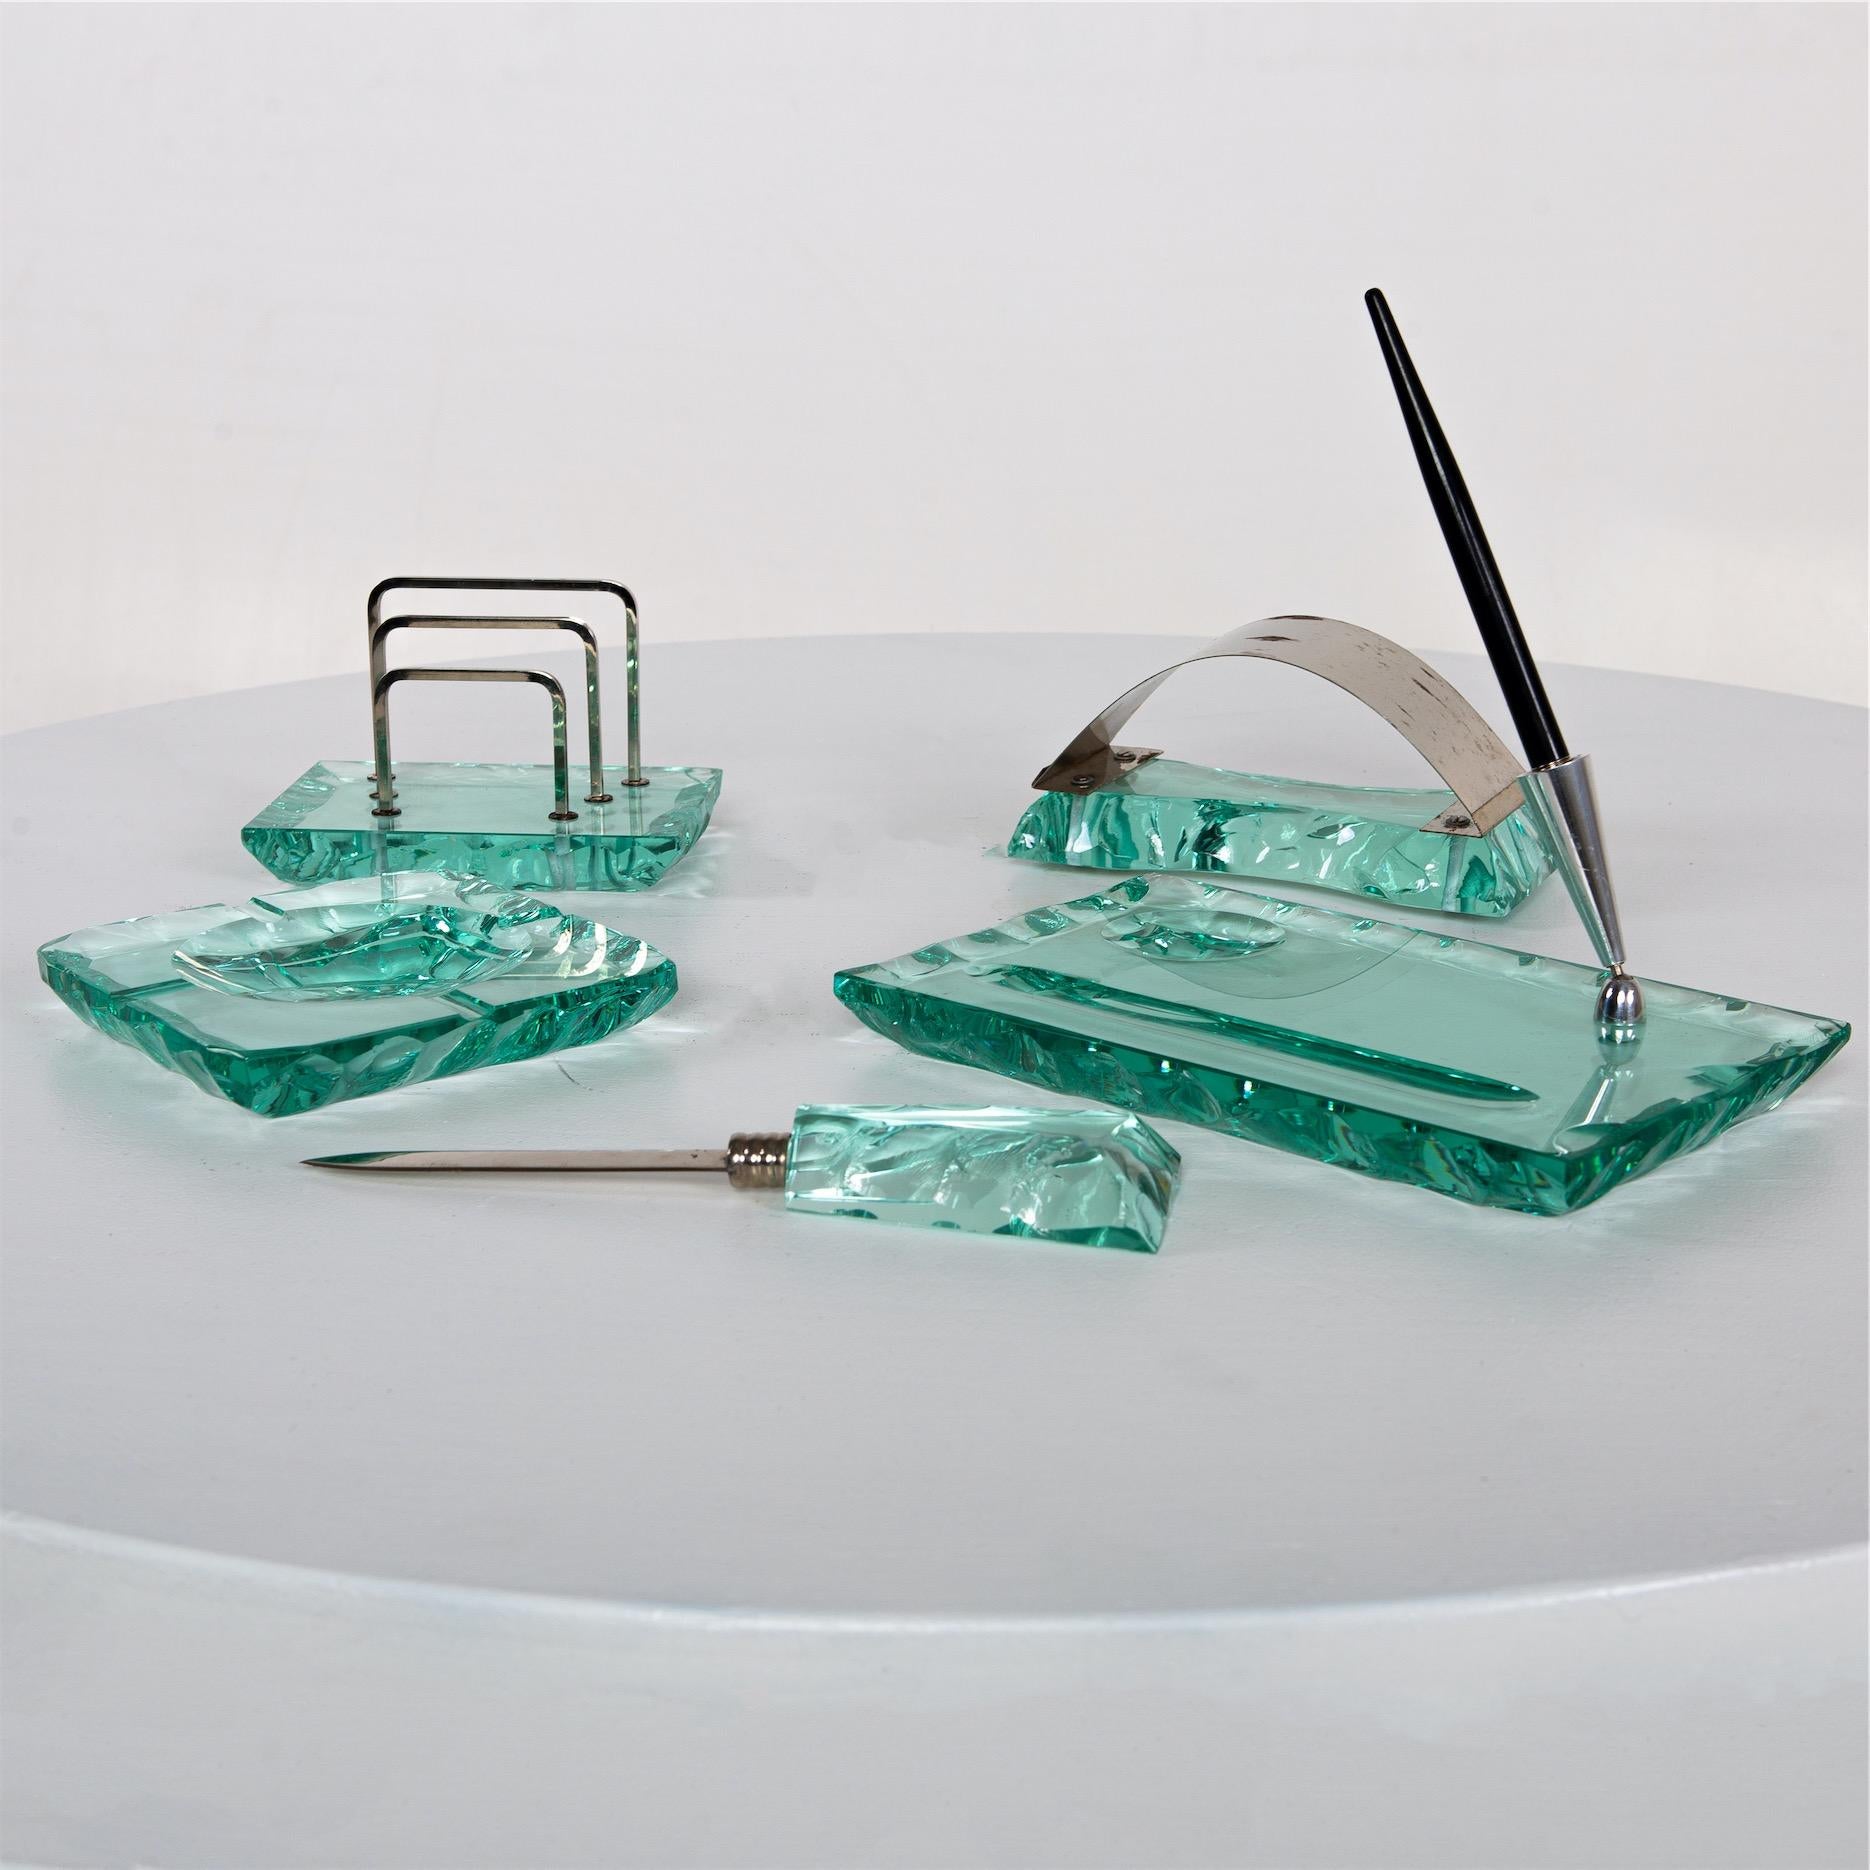 Desk set made of Nilo glass with rough edges in its original case. Included are a letter opener, pen and letter holder, ashtray and ink eraser. The case shows strong signs of age and use, the set is in very good condition.